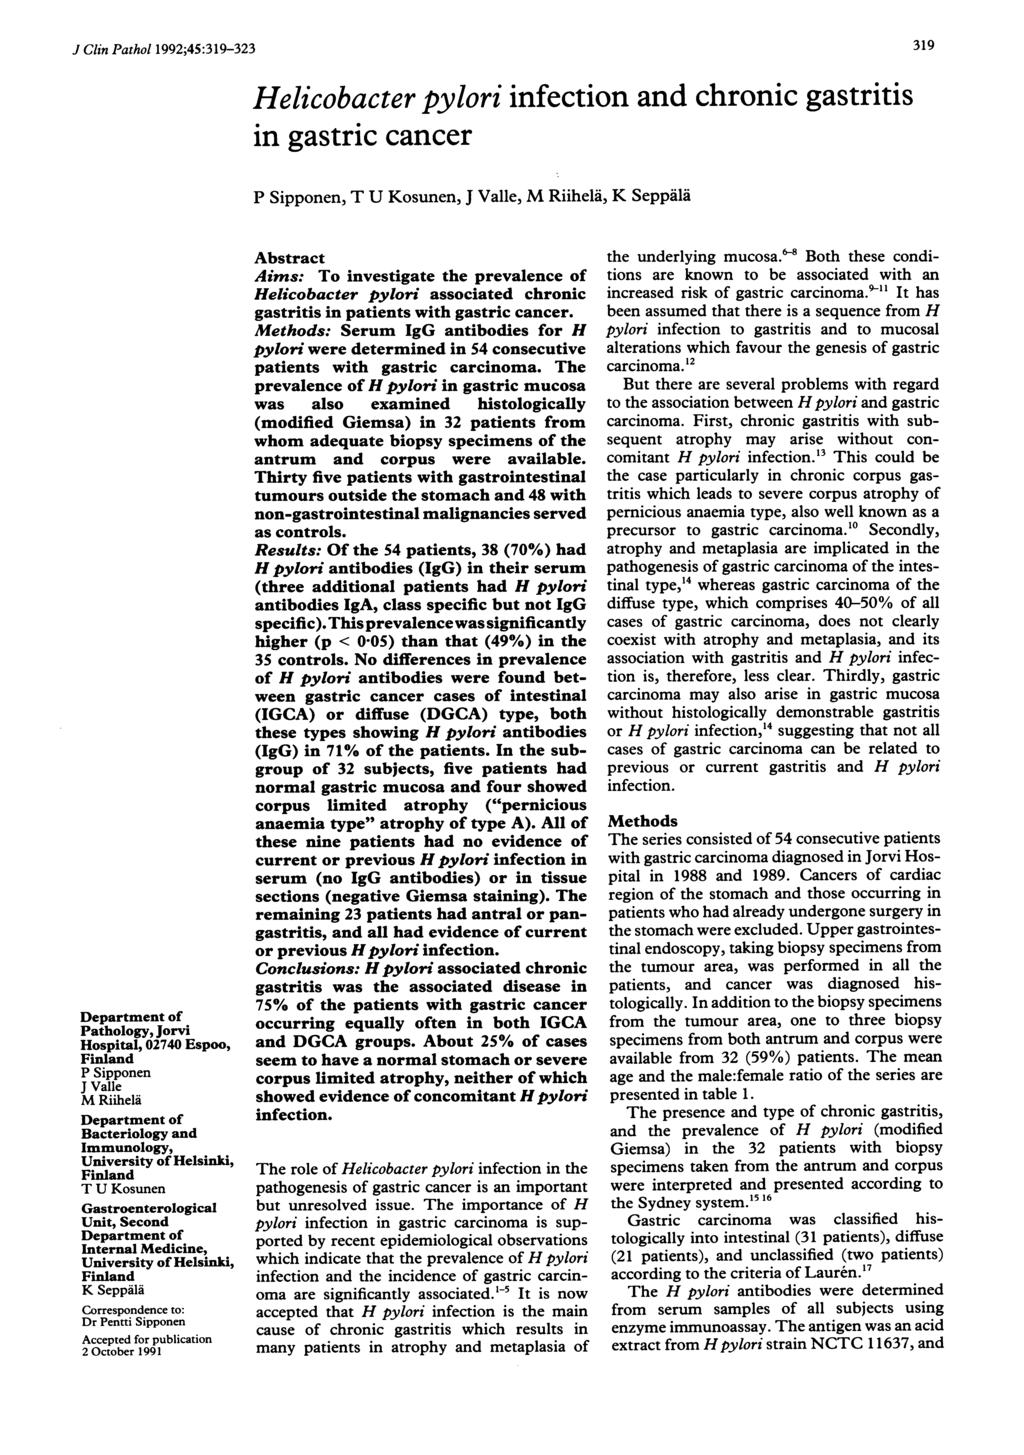 J Clin Pathol 1992;45:319-323 319 Helicobacter pylori infection and chronic gastritis in gastric cancer Pathology, Jorvi Hospital, 02740 Espoo, P Sipponen J Valle M Riihela Bacteriology and